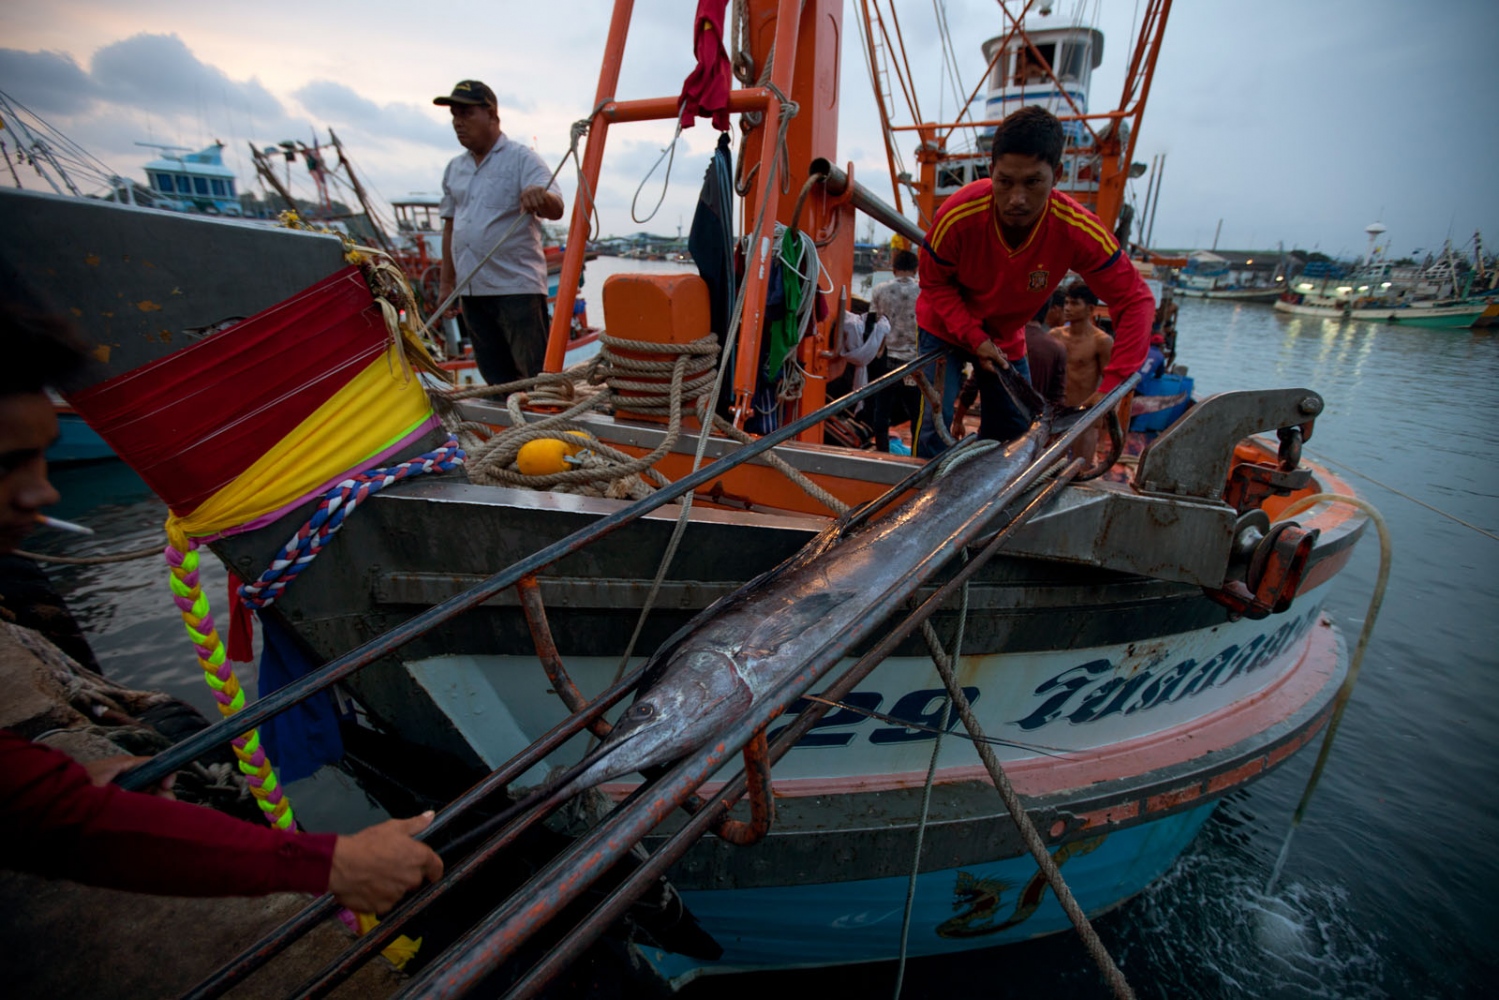 EMPTYING THE SEAS - A catch of large sail fish is being unloaded from a Thai...